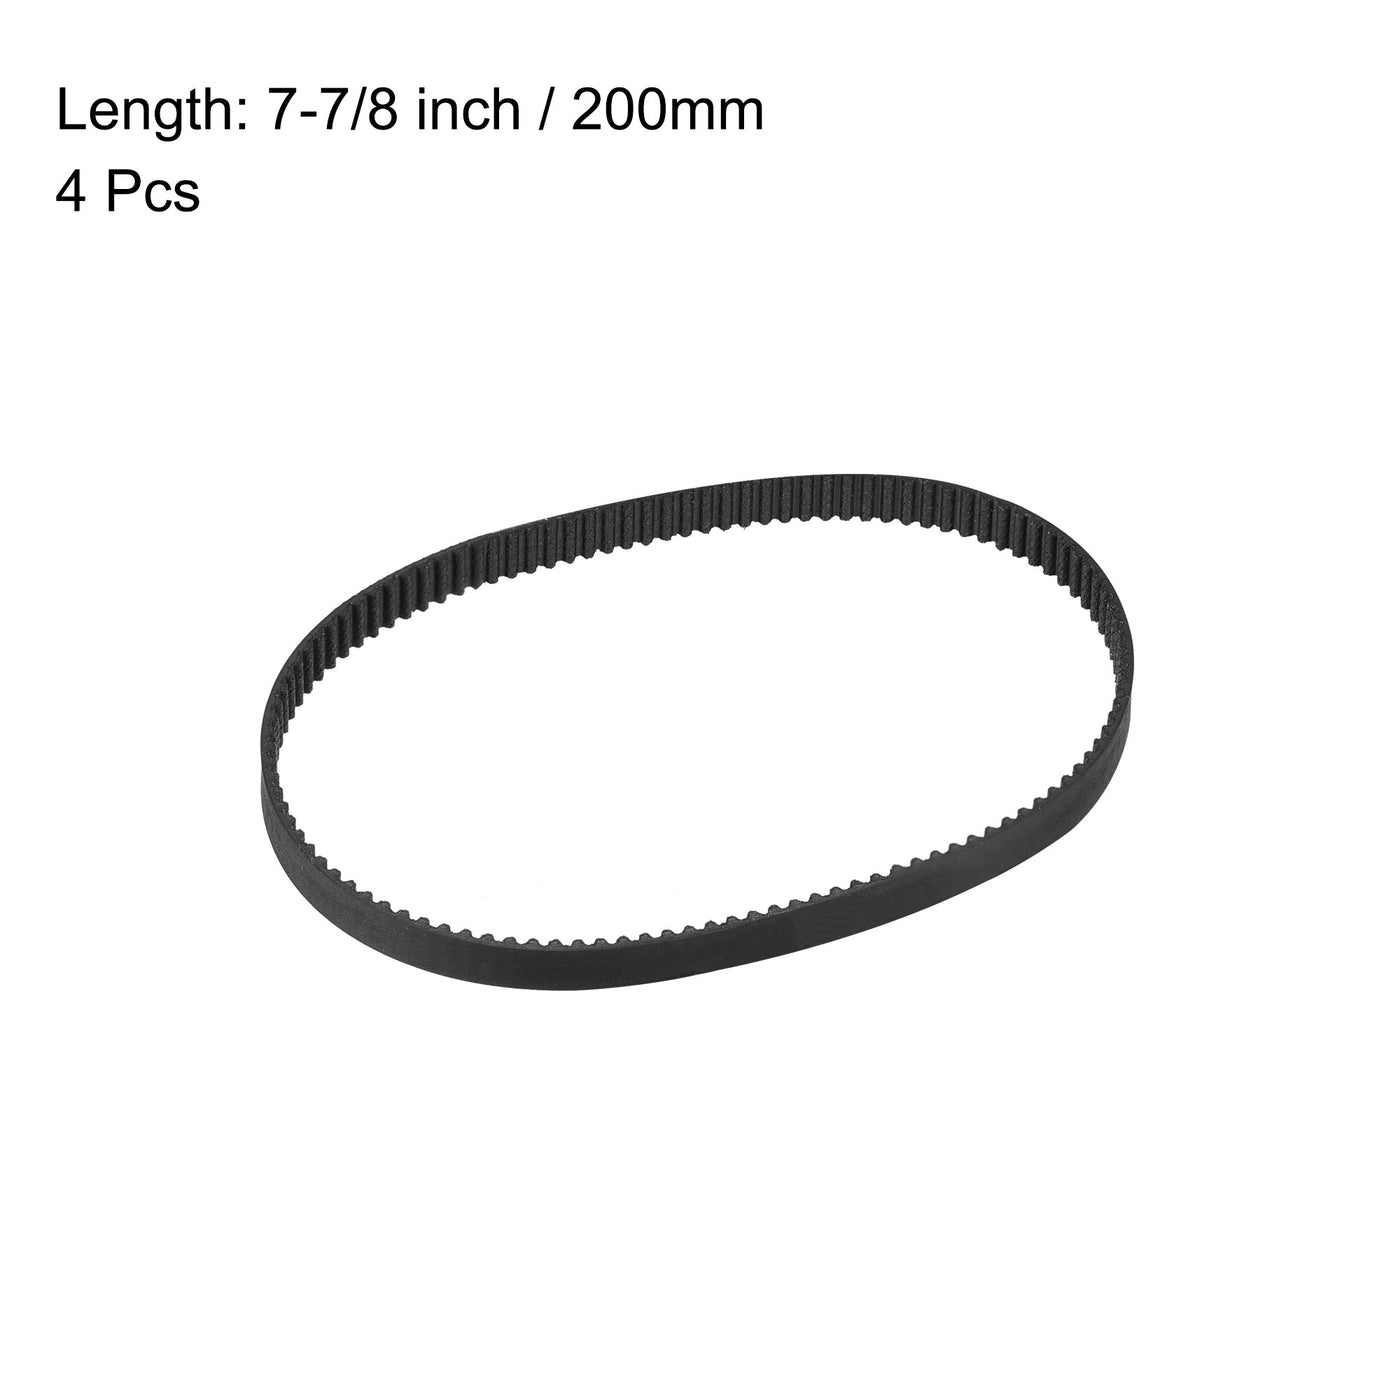 Uxcell Uxcell Timing Belt 610mm 752mm Circumference 6mm Width Closed for 3D Printer 2pcs